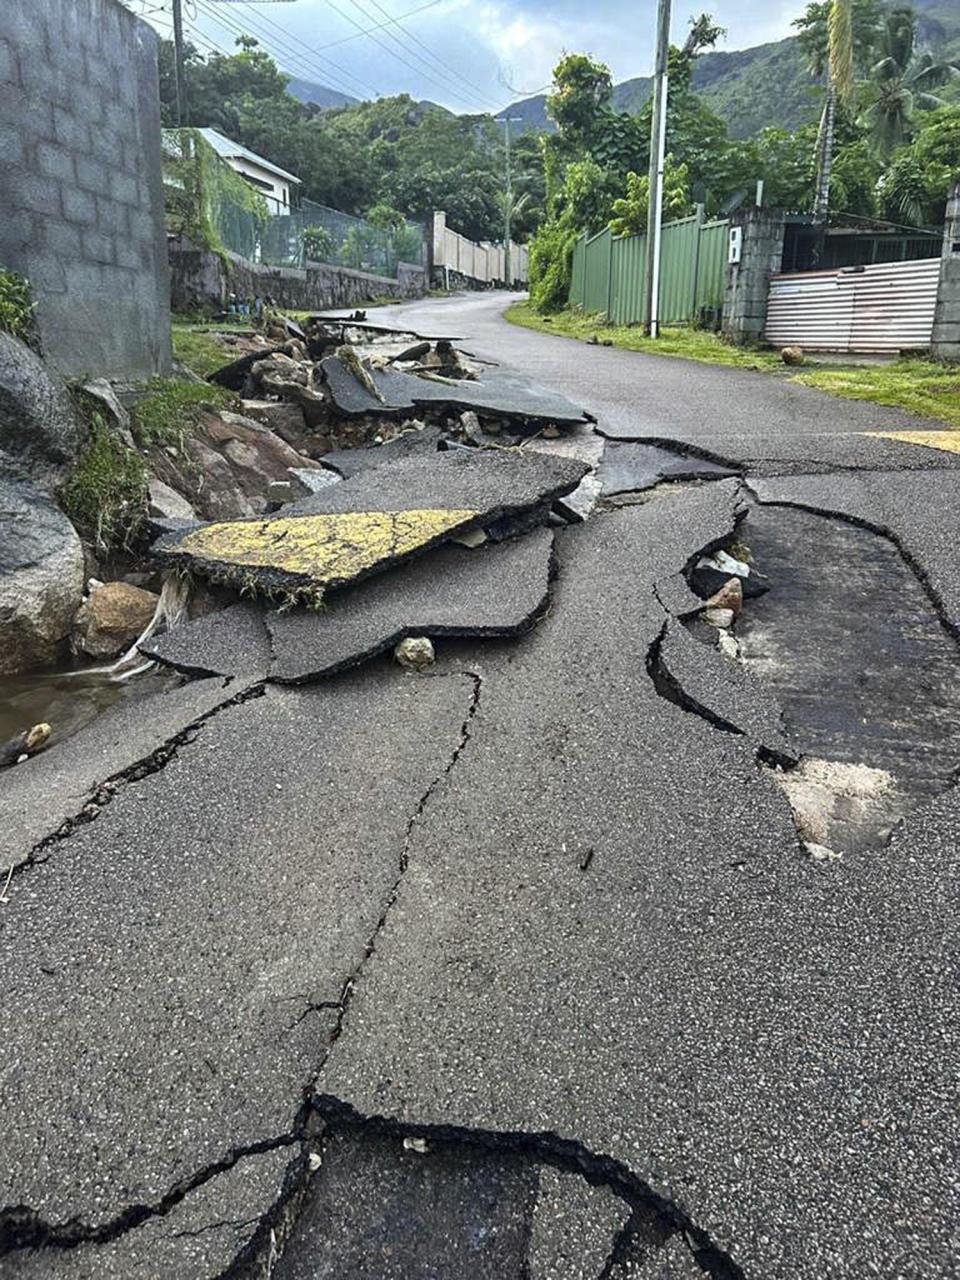 Cracks along a road in the aftermath of a massive explosion at an industrial area on the main island in Mahe, Seychelles, Thursday, Dec. 7, 2023. Authorities in Seychelles declared a state of emergency Thursday after a blast at an explosives store caused “massive damage” in an industrial area also facing flooding amid heavy rainfall, according to the presidency. The blast happened on Wednesday night in the Providence area of Mahe, the largest and most populous island of the Seychelles. (AP Photo/Emilie Chetty)